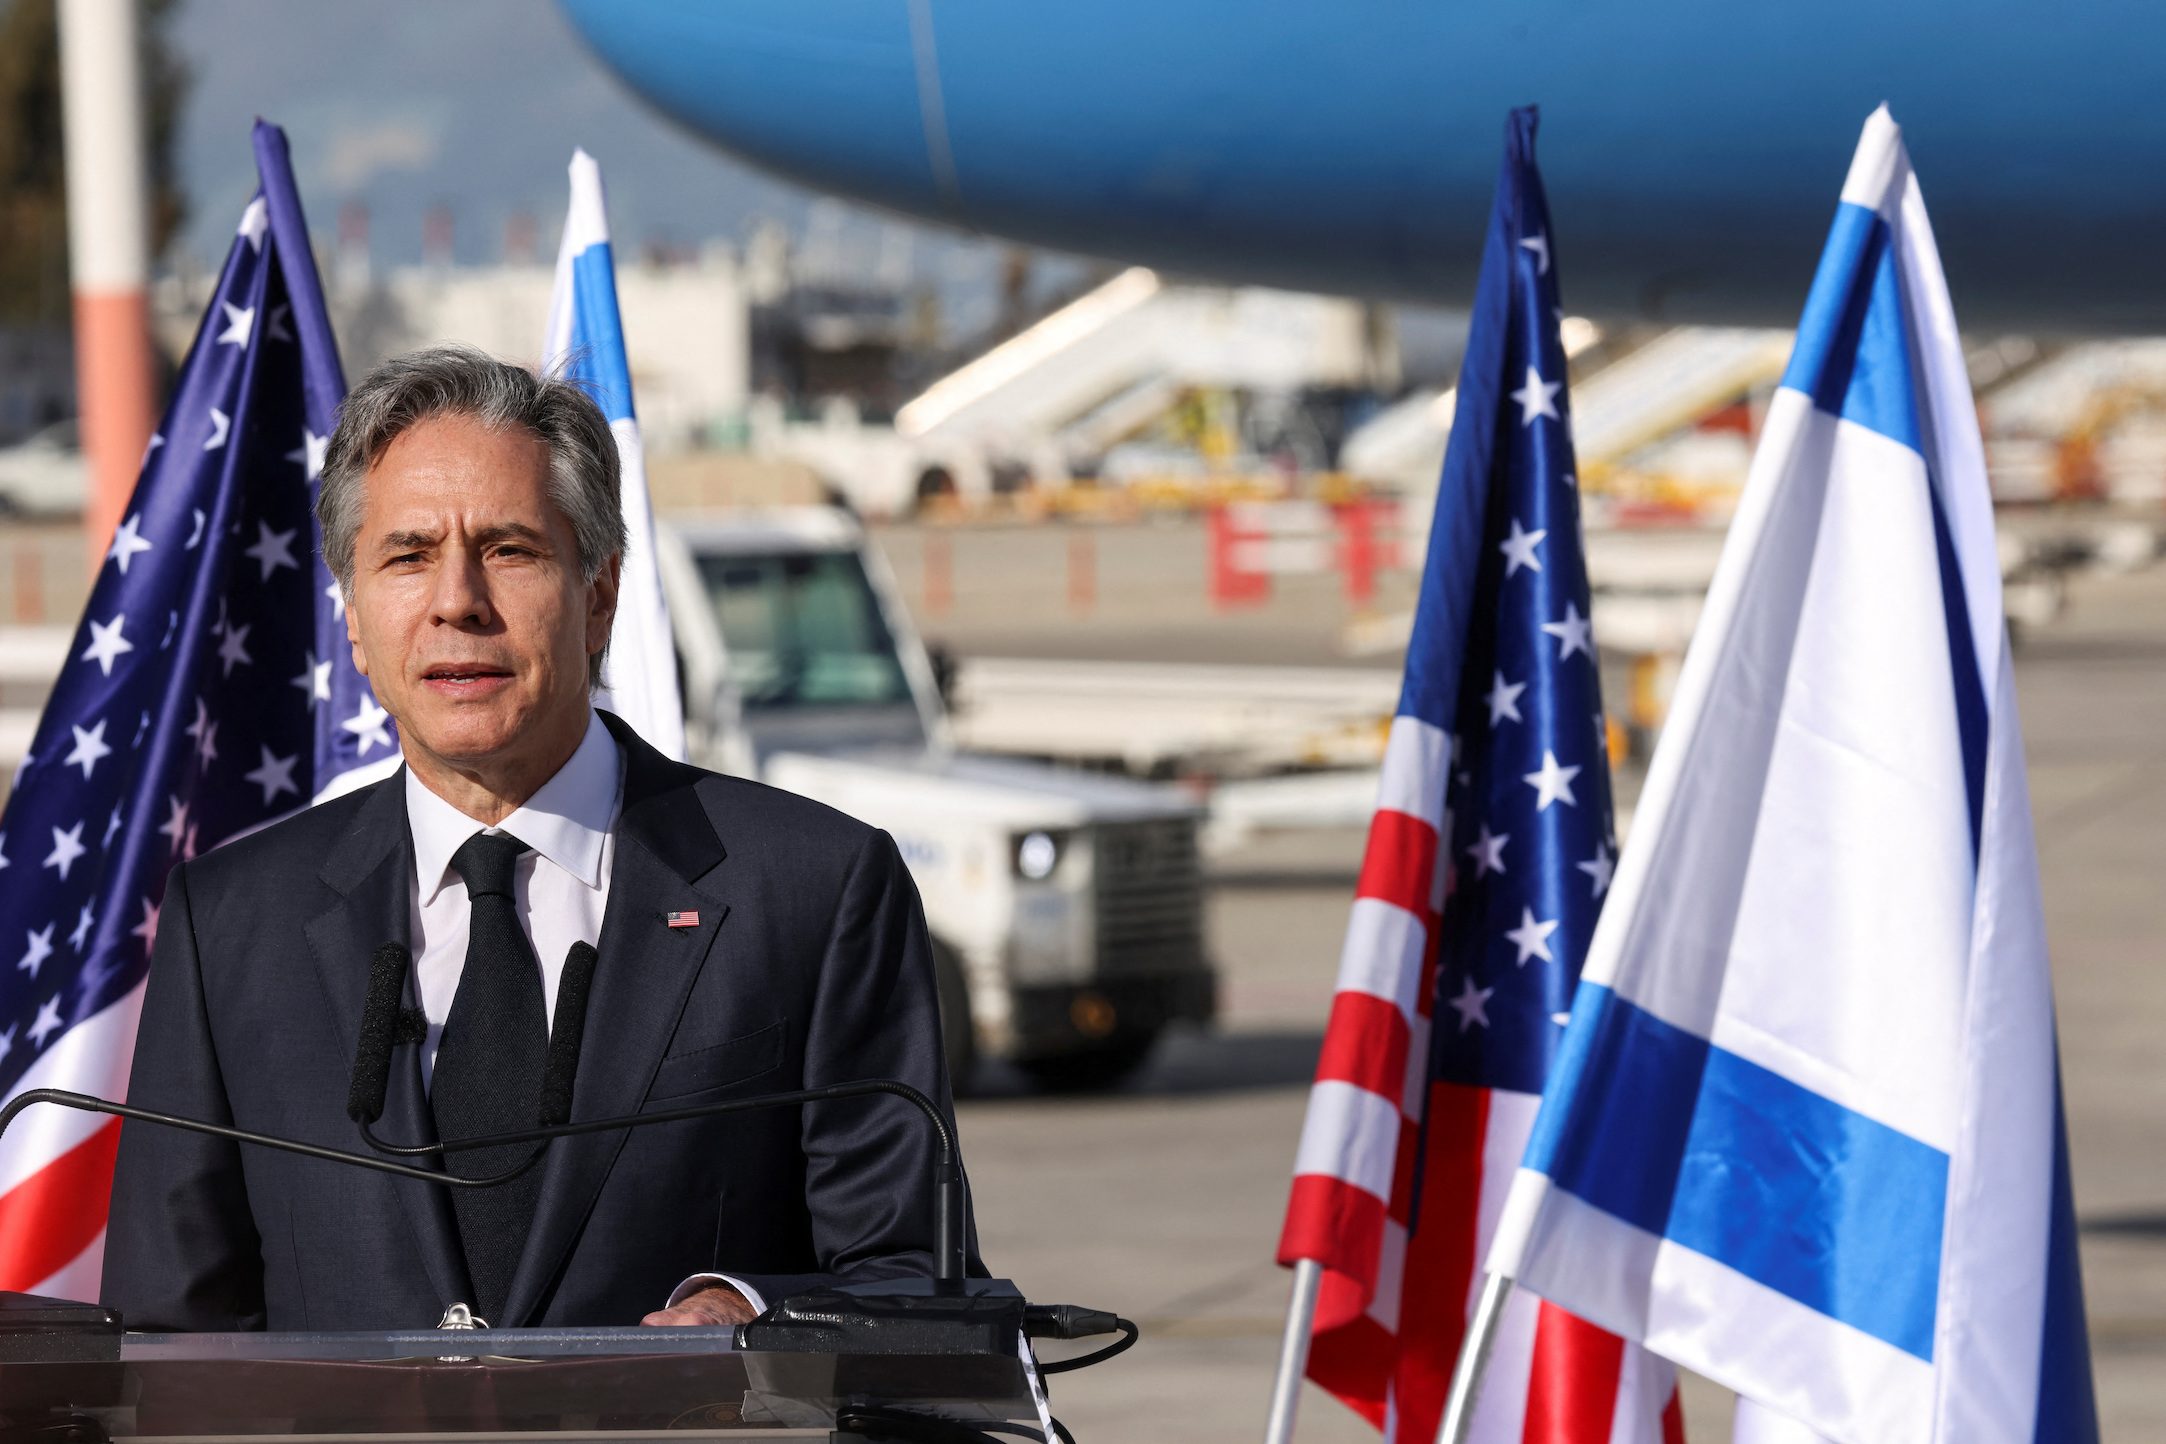 Blinken reaffirms need for 2-state solution as he lands in Israel